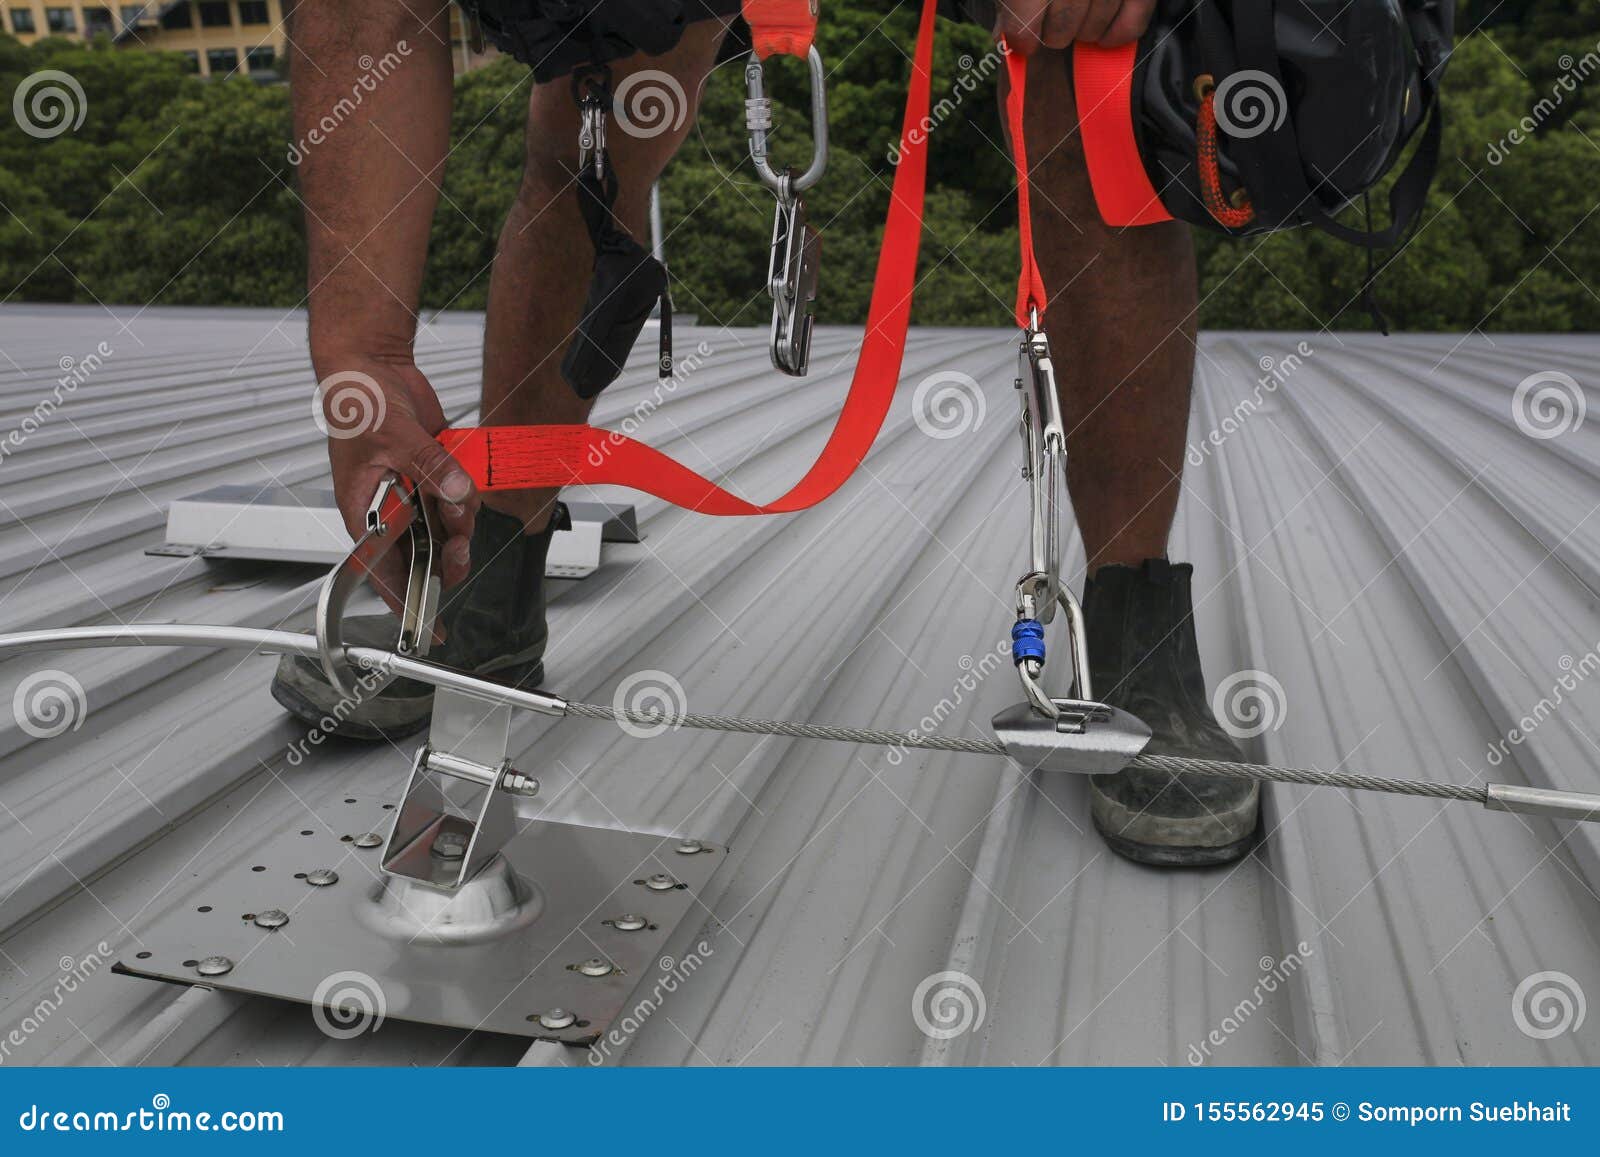 Trained Worker Clipping Stainless Industrial Locking Hook into Fall Arrest  Roof Anchor Point Systems Stock Image - Image of connecting, arrest:  155562945